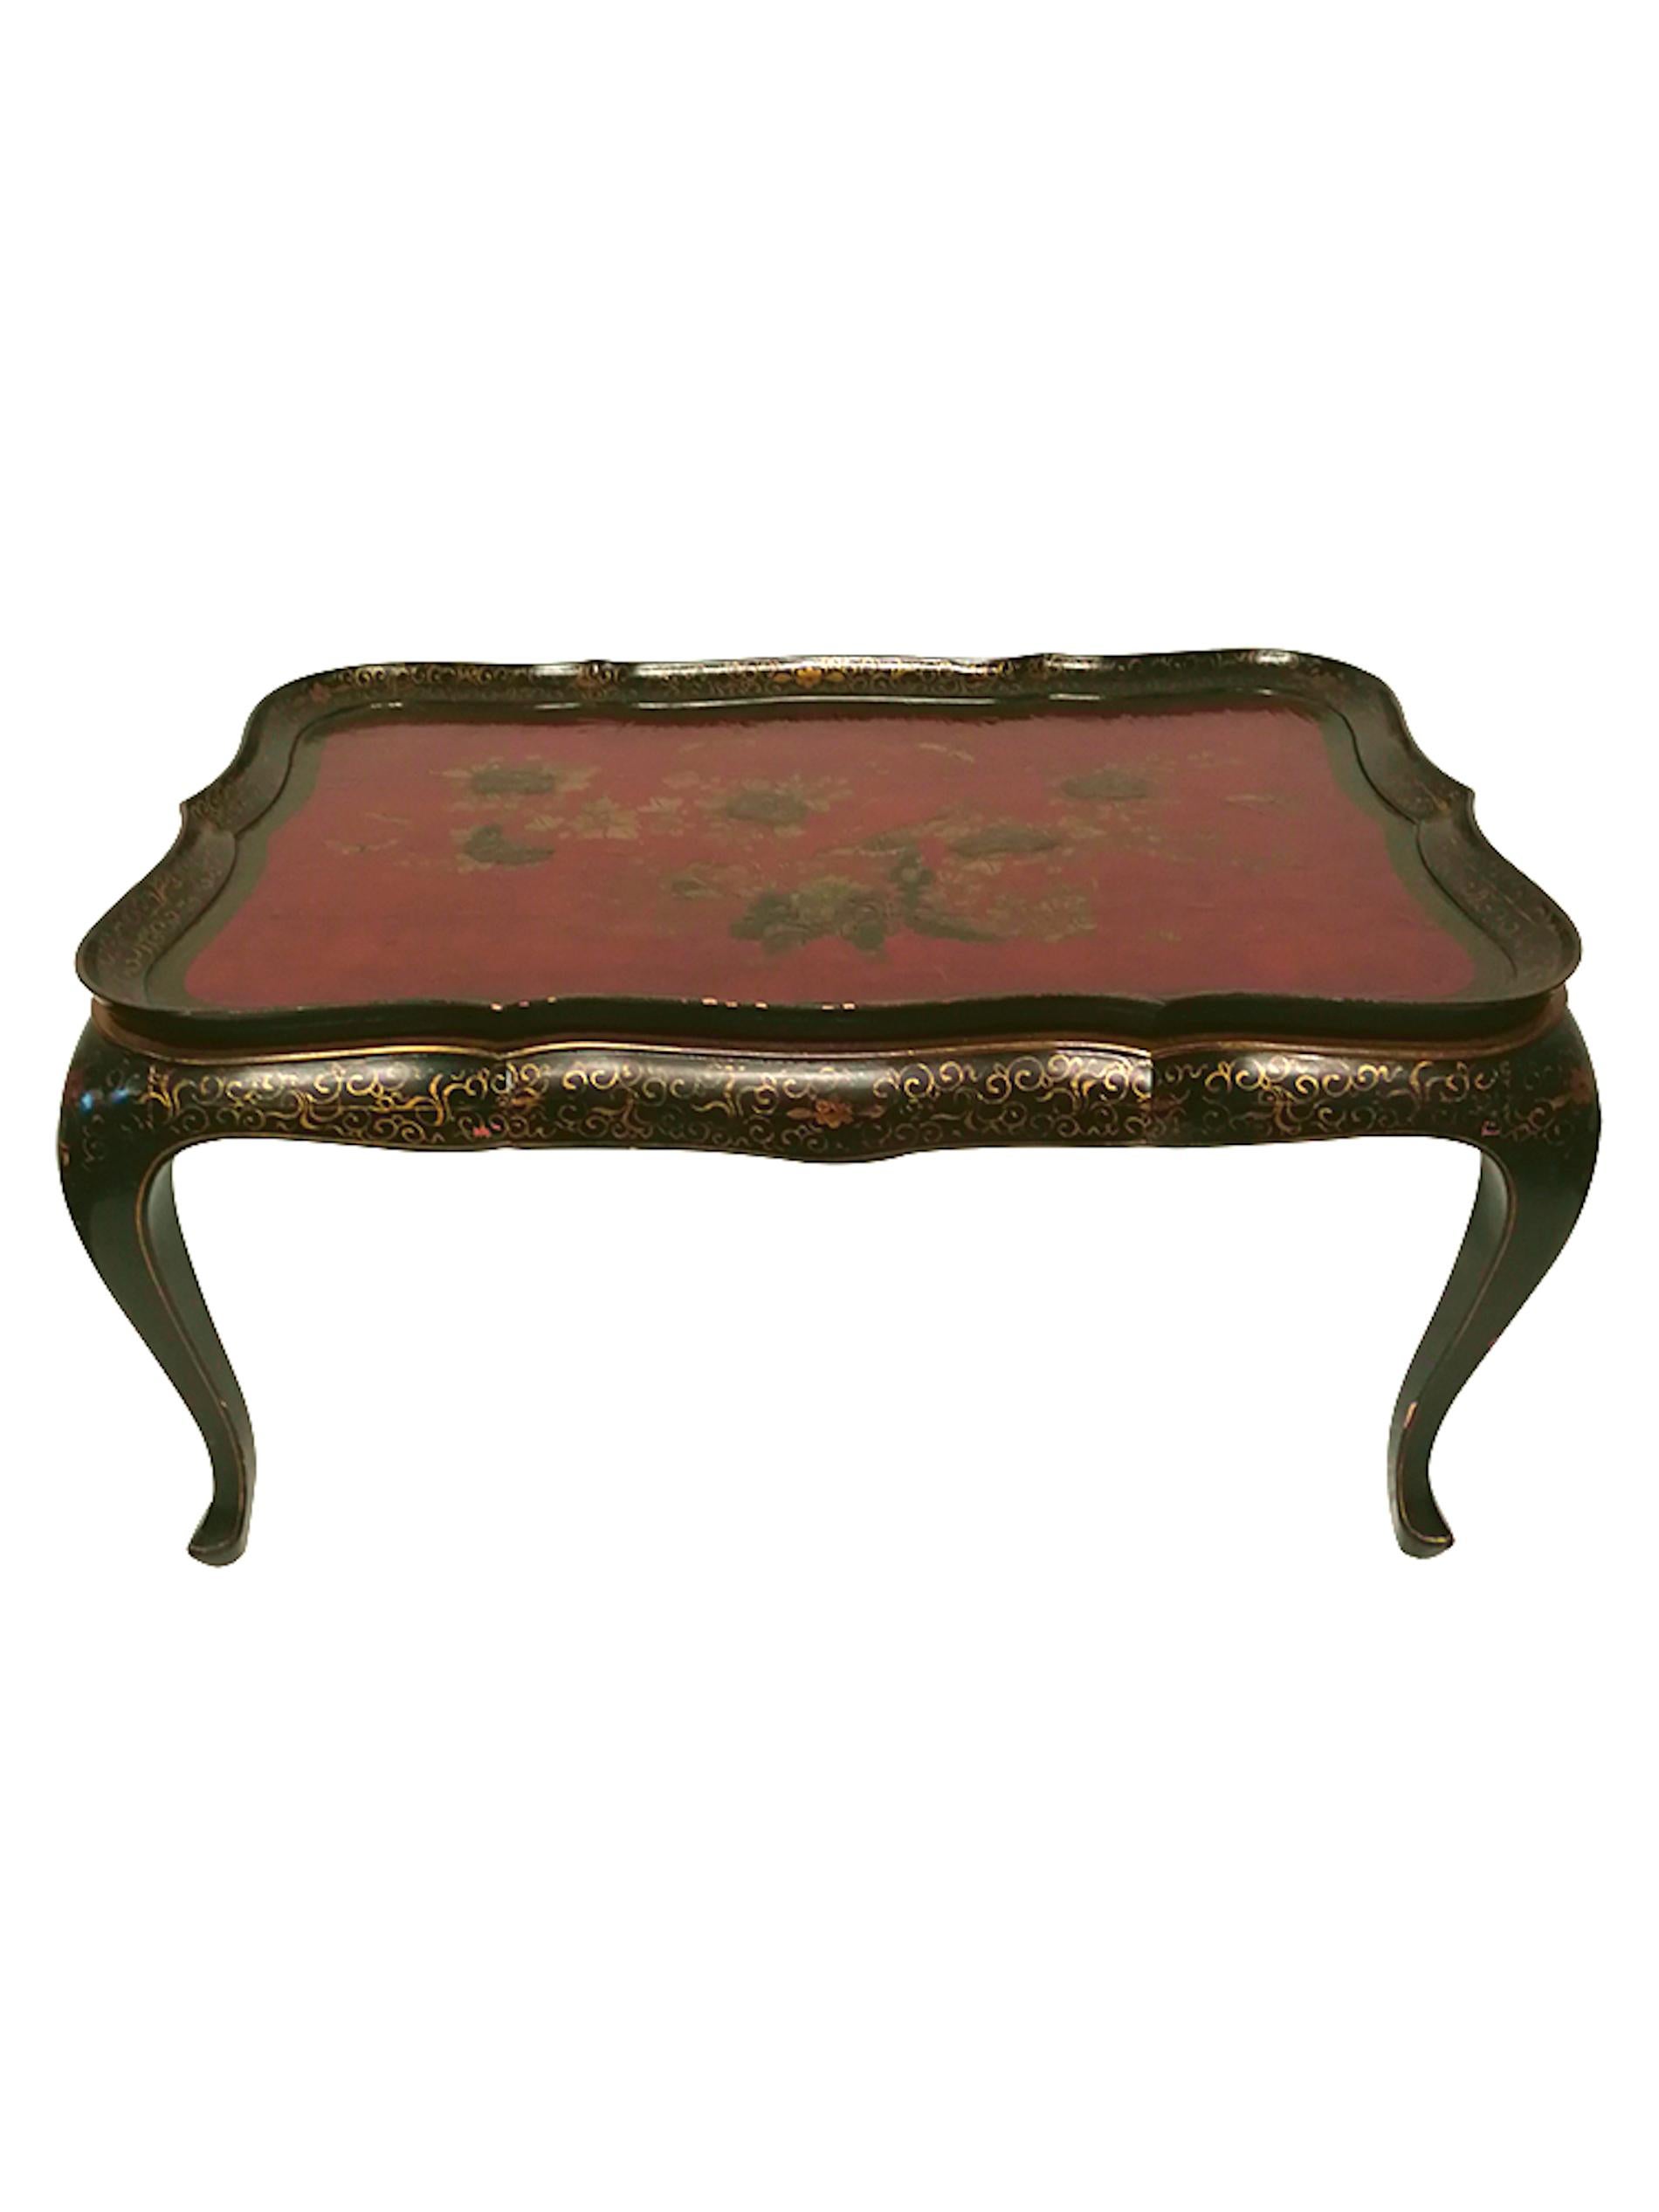 Chinese hand painted coffee table in light wood from the 19th century, with an independent top hand painted tray with 37 layers of lacquer. 
The table is lacquered in black with a gilt floral decoration.
The rim of the independent tray is